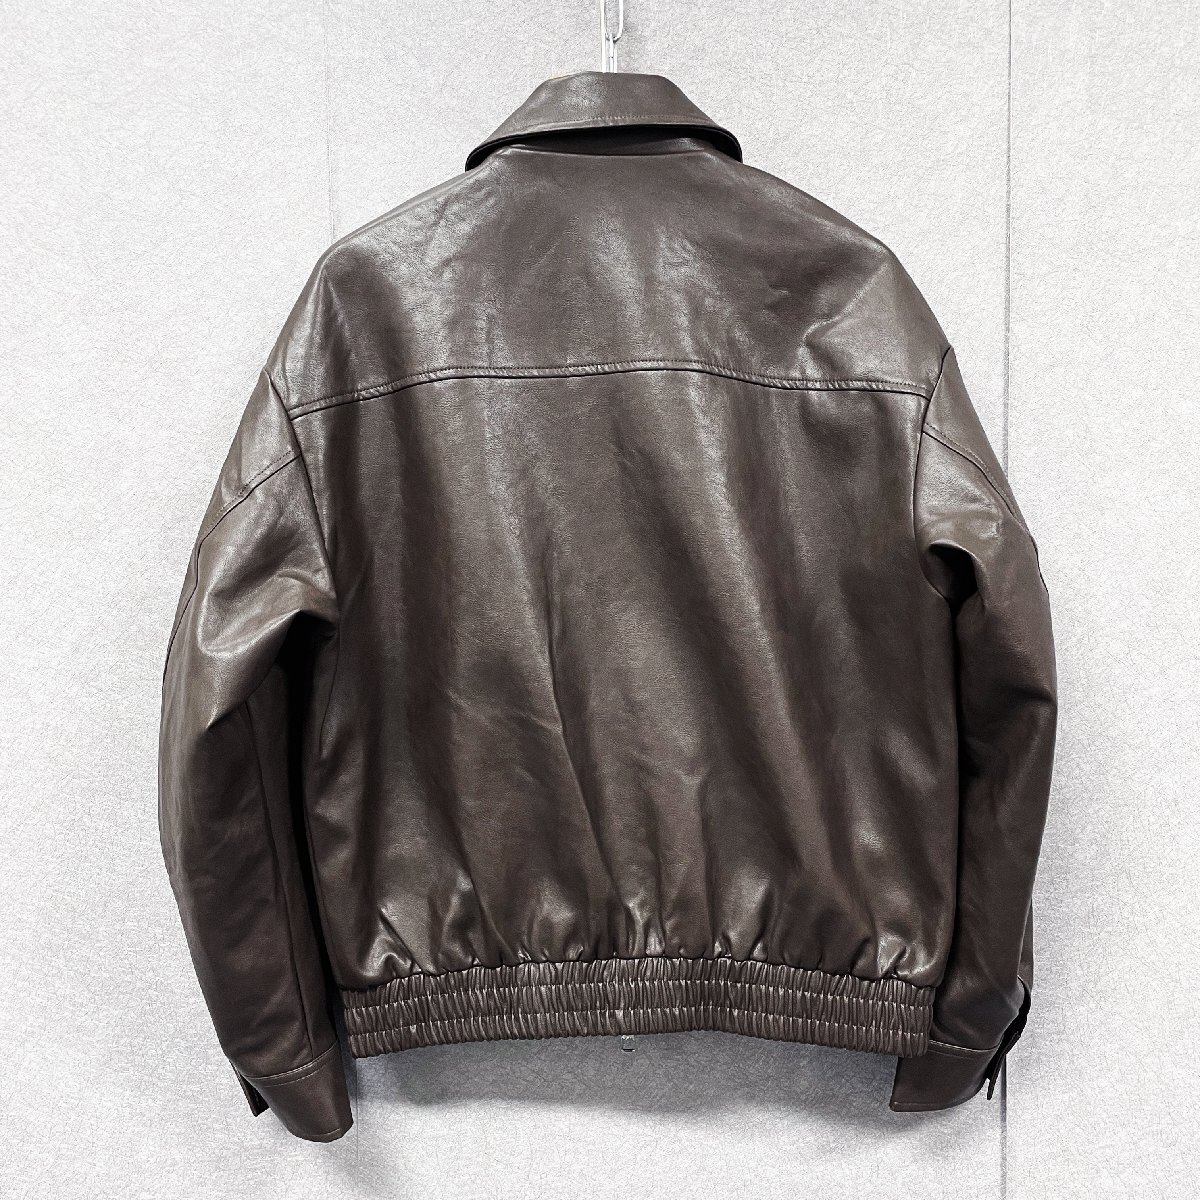  high class * leather jacket regular price 15 ten thousand *Emmauela* Italy * milano departure * high quality cow leather piece . leather jacket motorcycle Rider's dressing up piece .L/48